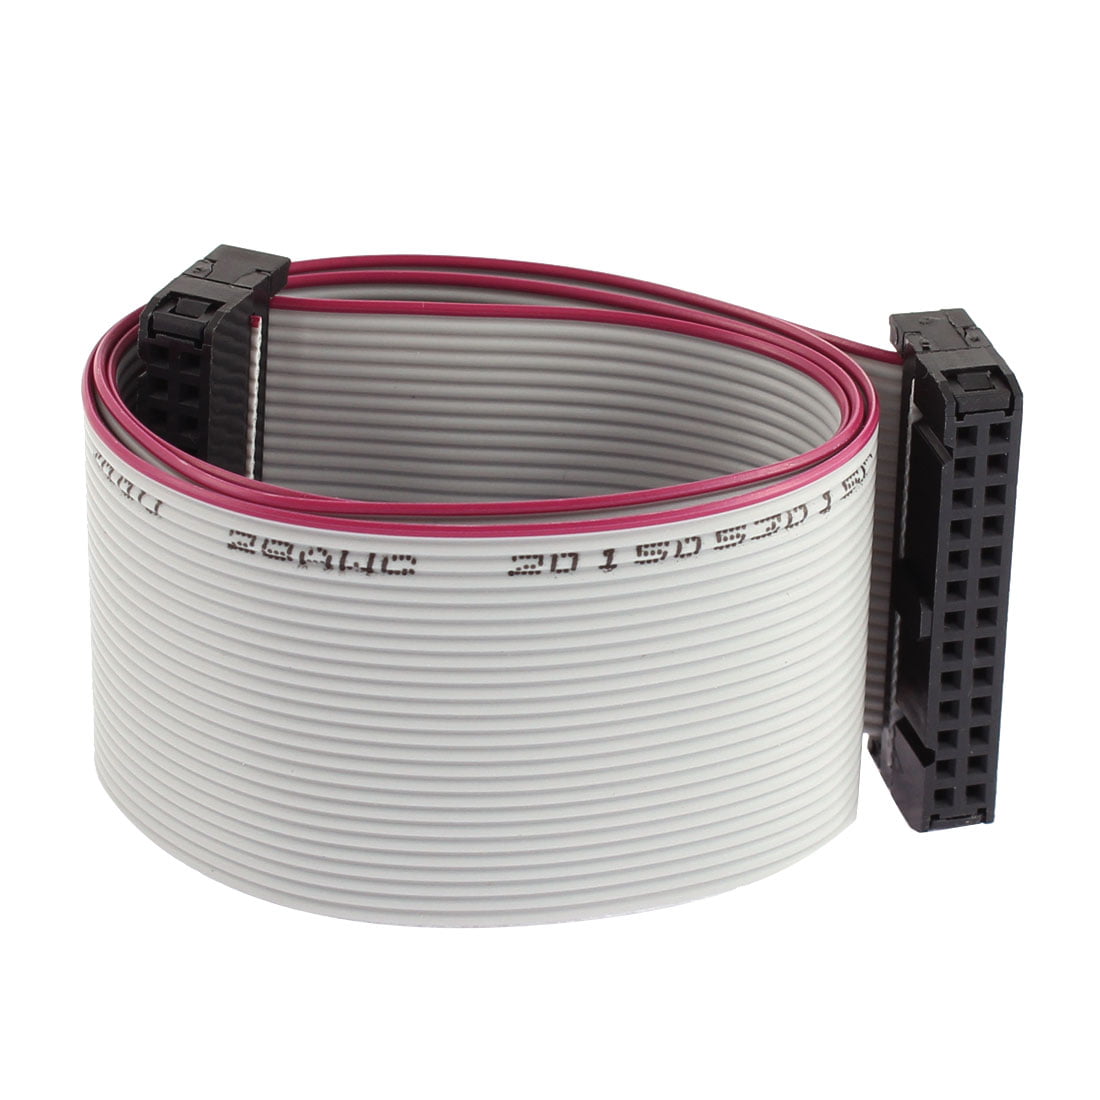 1Pcs 34 Pin 80cm 2.54mm Pitch 28AWG IDC Flat Ribbon Cable with Red Line 